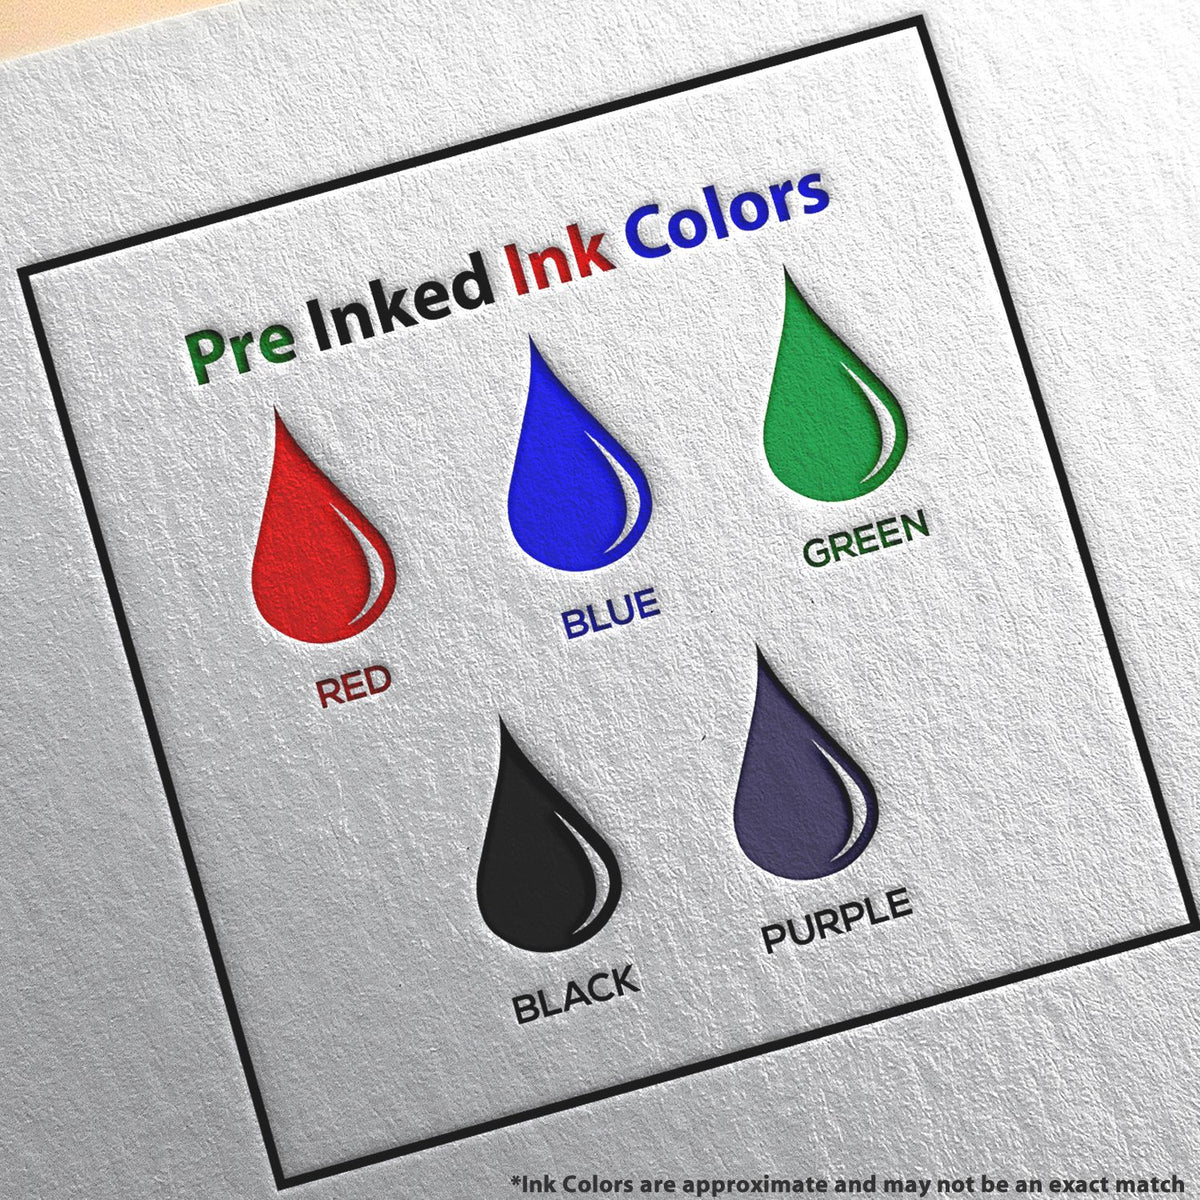 A picture showing the different ink colors or hues available for the MaxLight Premium Pre-Inked Montana State Seal Notarial Stamp product.